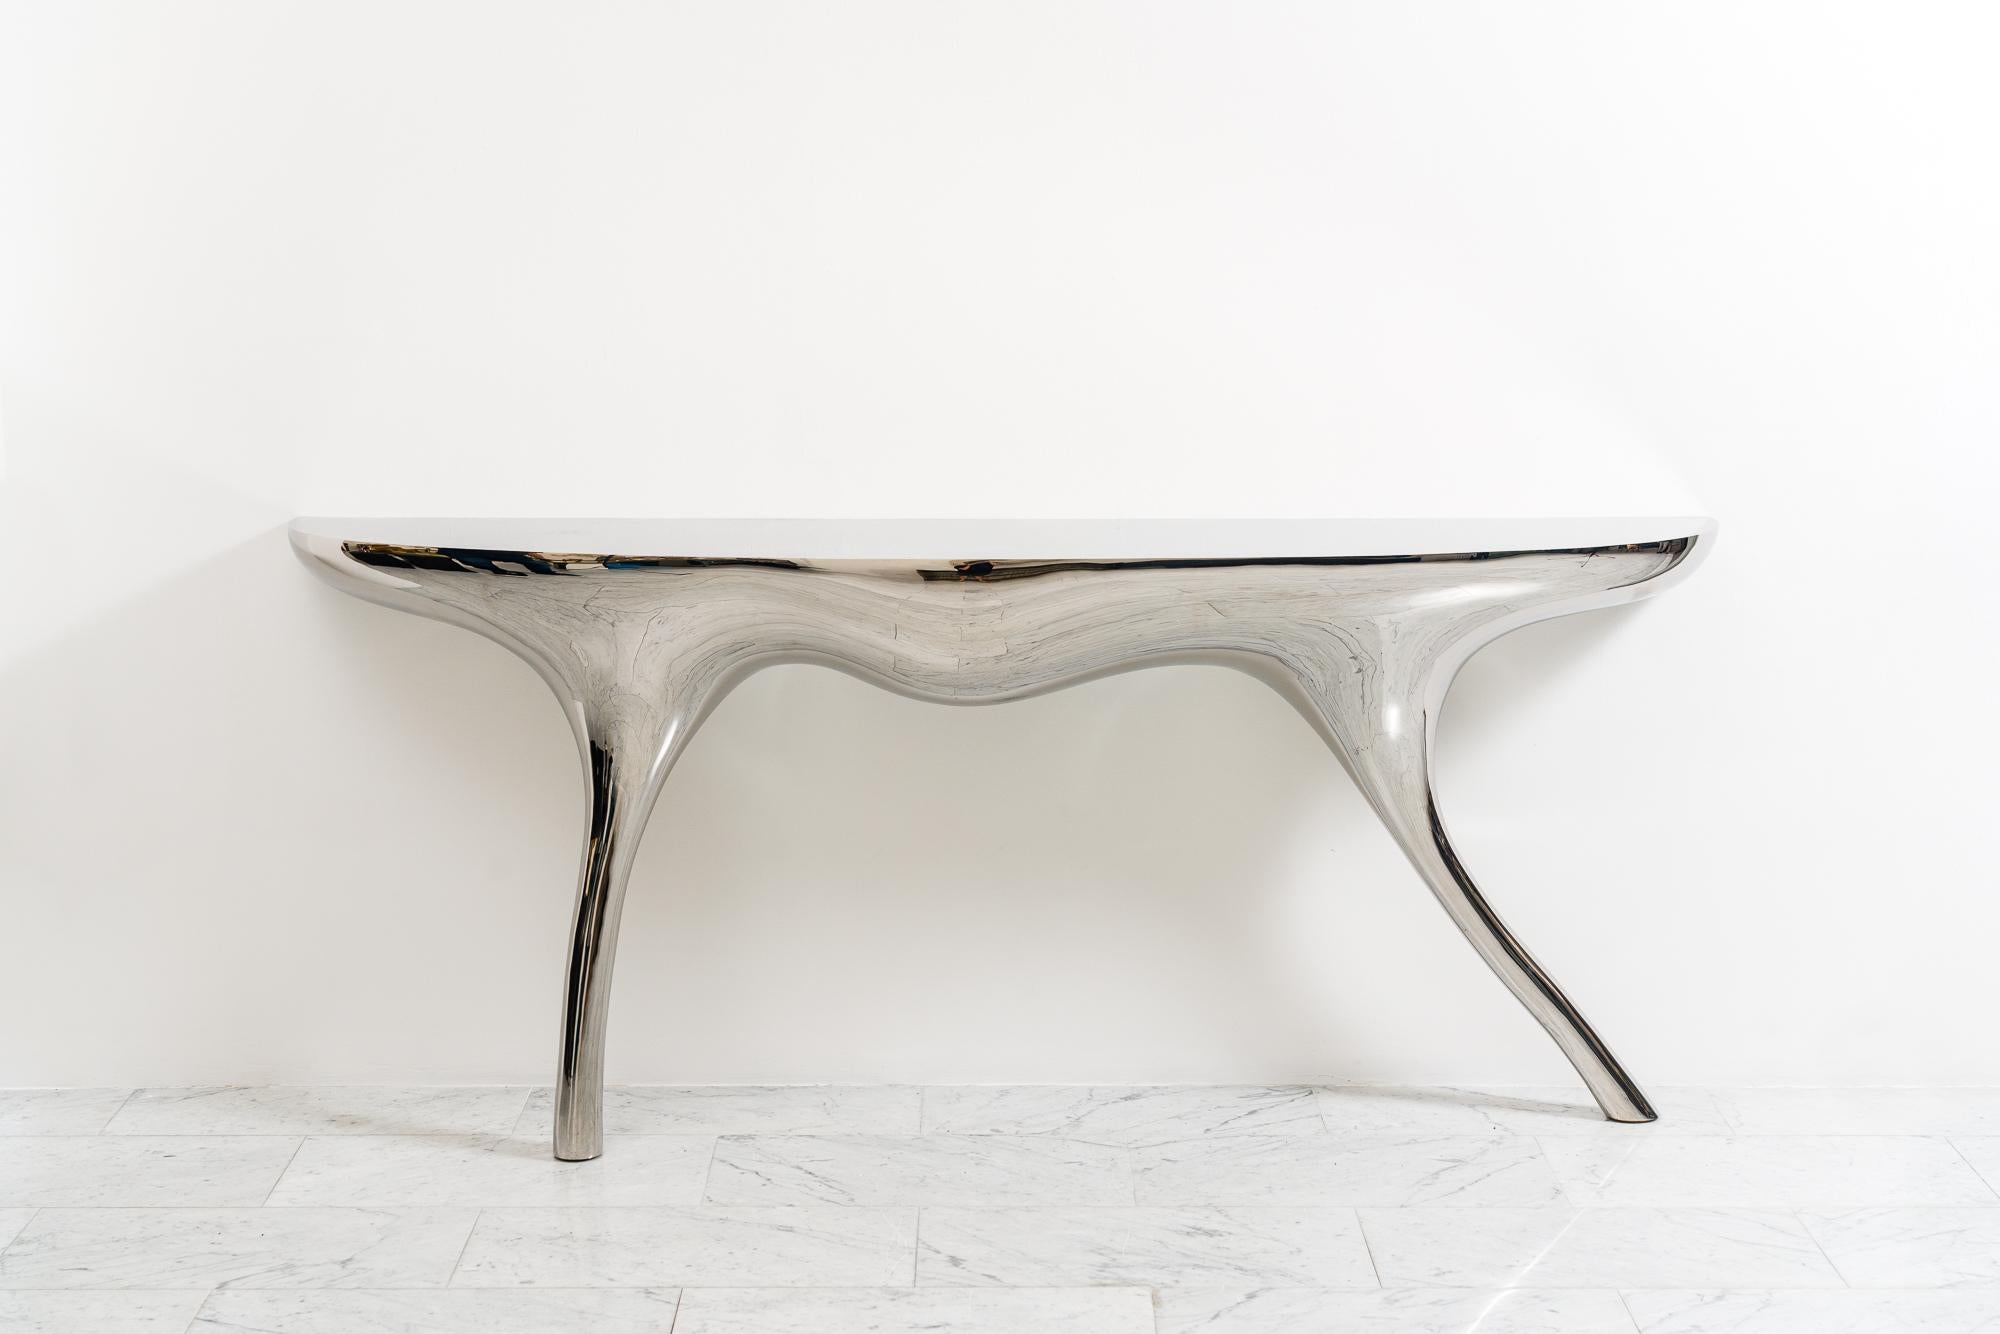 Alex Roskin’s L’éléphant Console reflects the artist’s modernist and primitivist influences. His works blend functional design with modernist sculptural references. A natural successor of innovative artists such as Richard Serra, Jean Arp, and